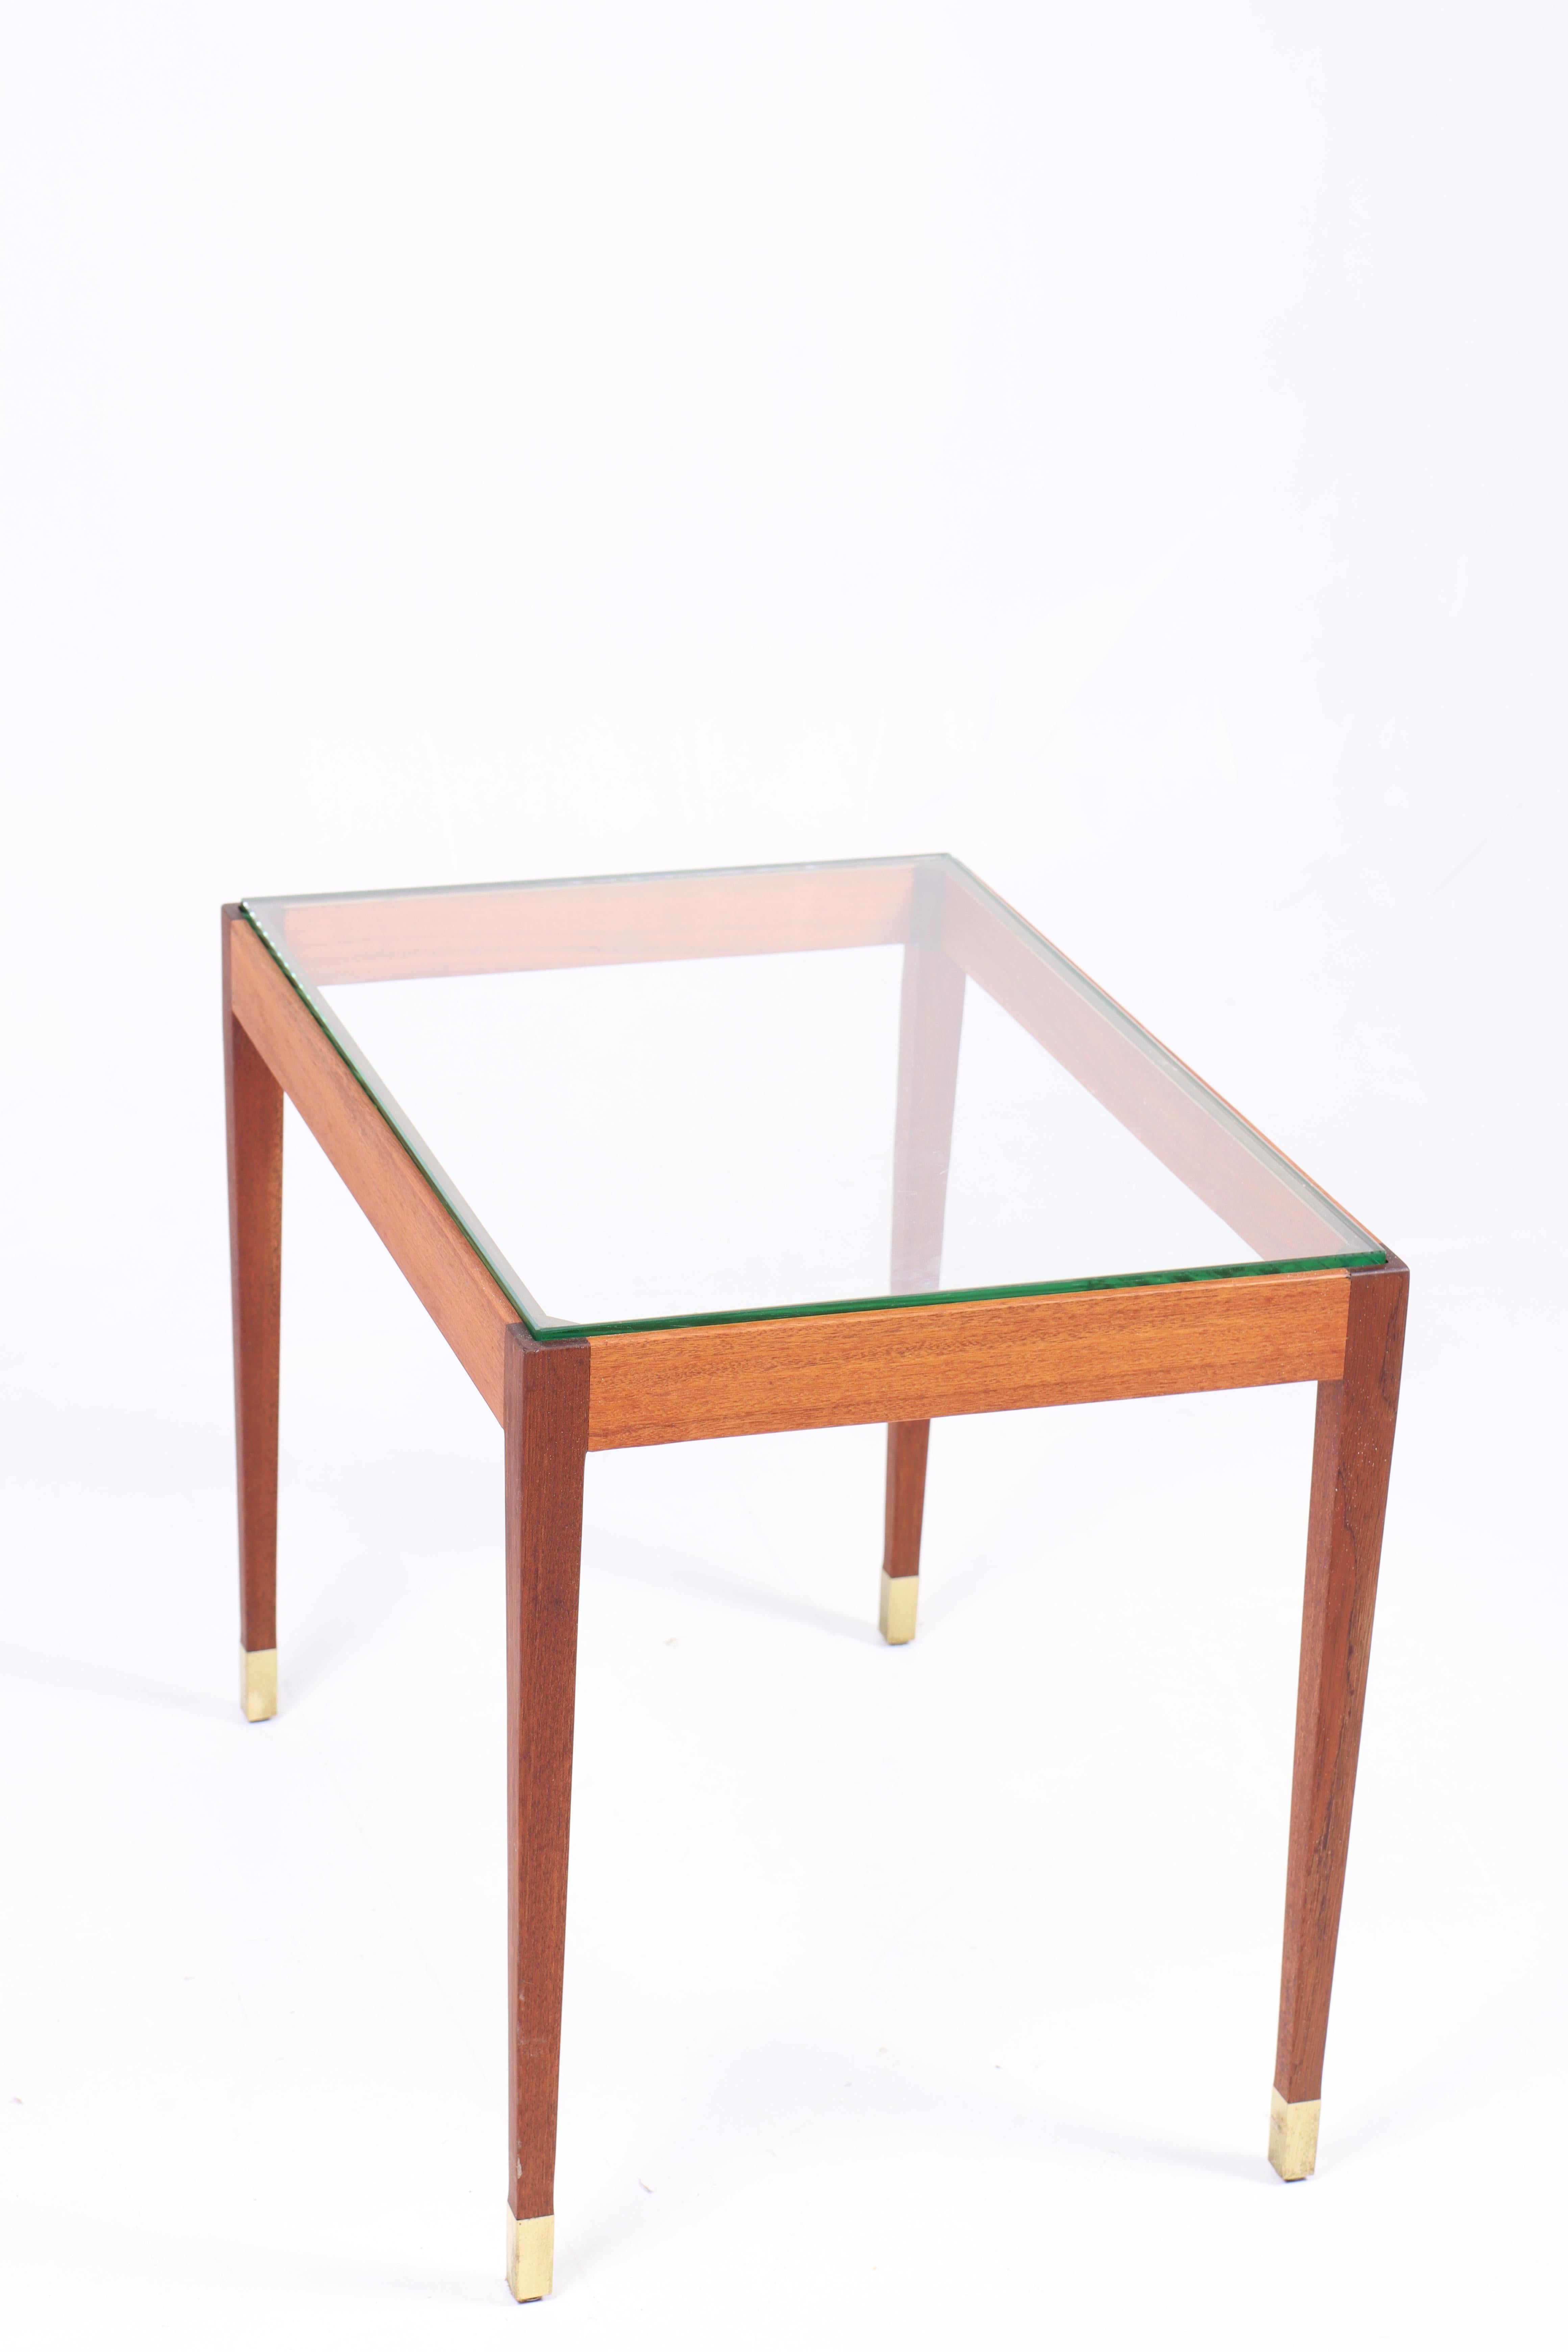 Midcentury Low Table in Glass and Teak, Made in Denmark 1960s For Sale 3